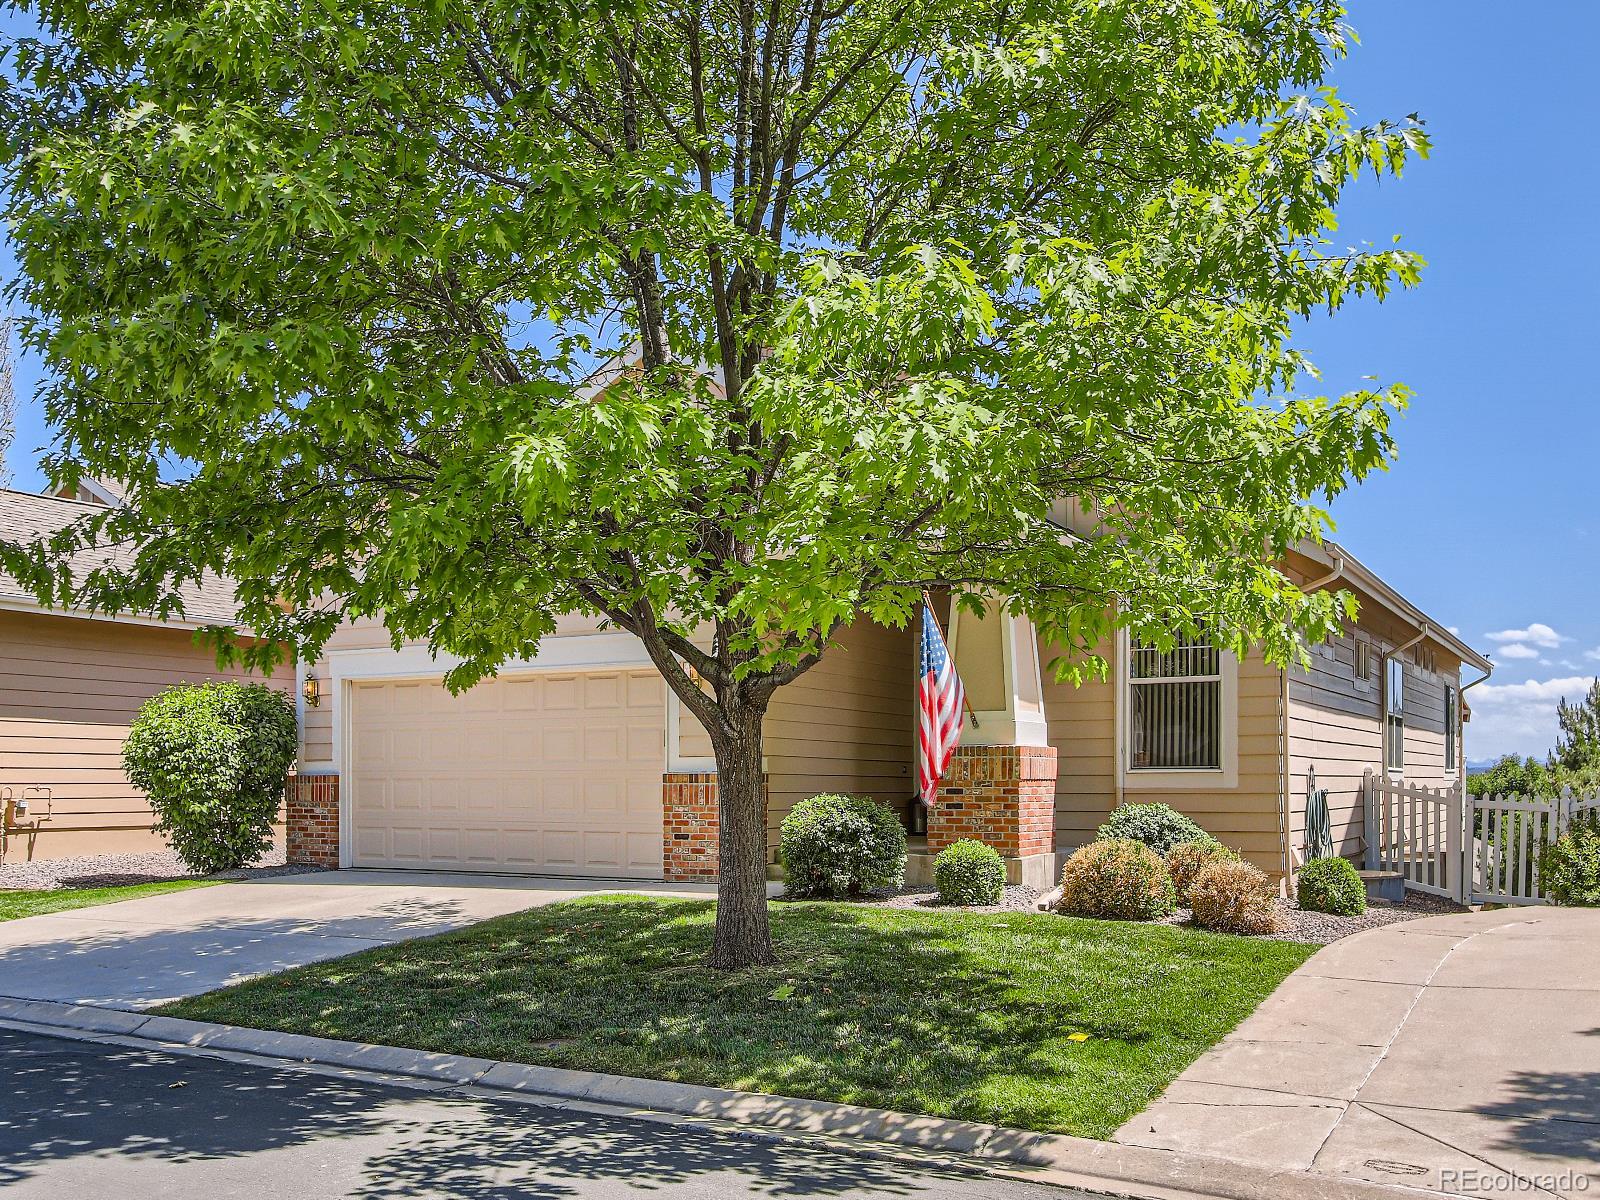 13658 W 62nd Drive, arvada MLS: 6904138 Beds: 3 Baths: 3 Price: $775,000